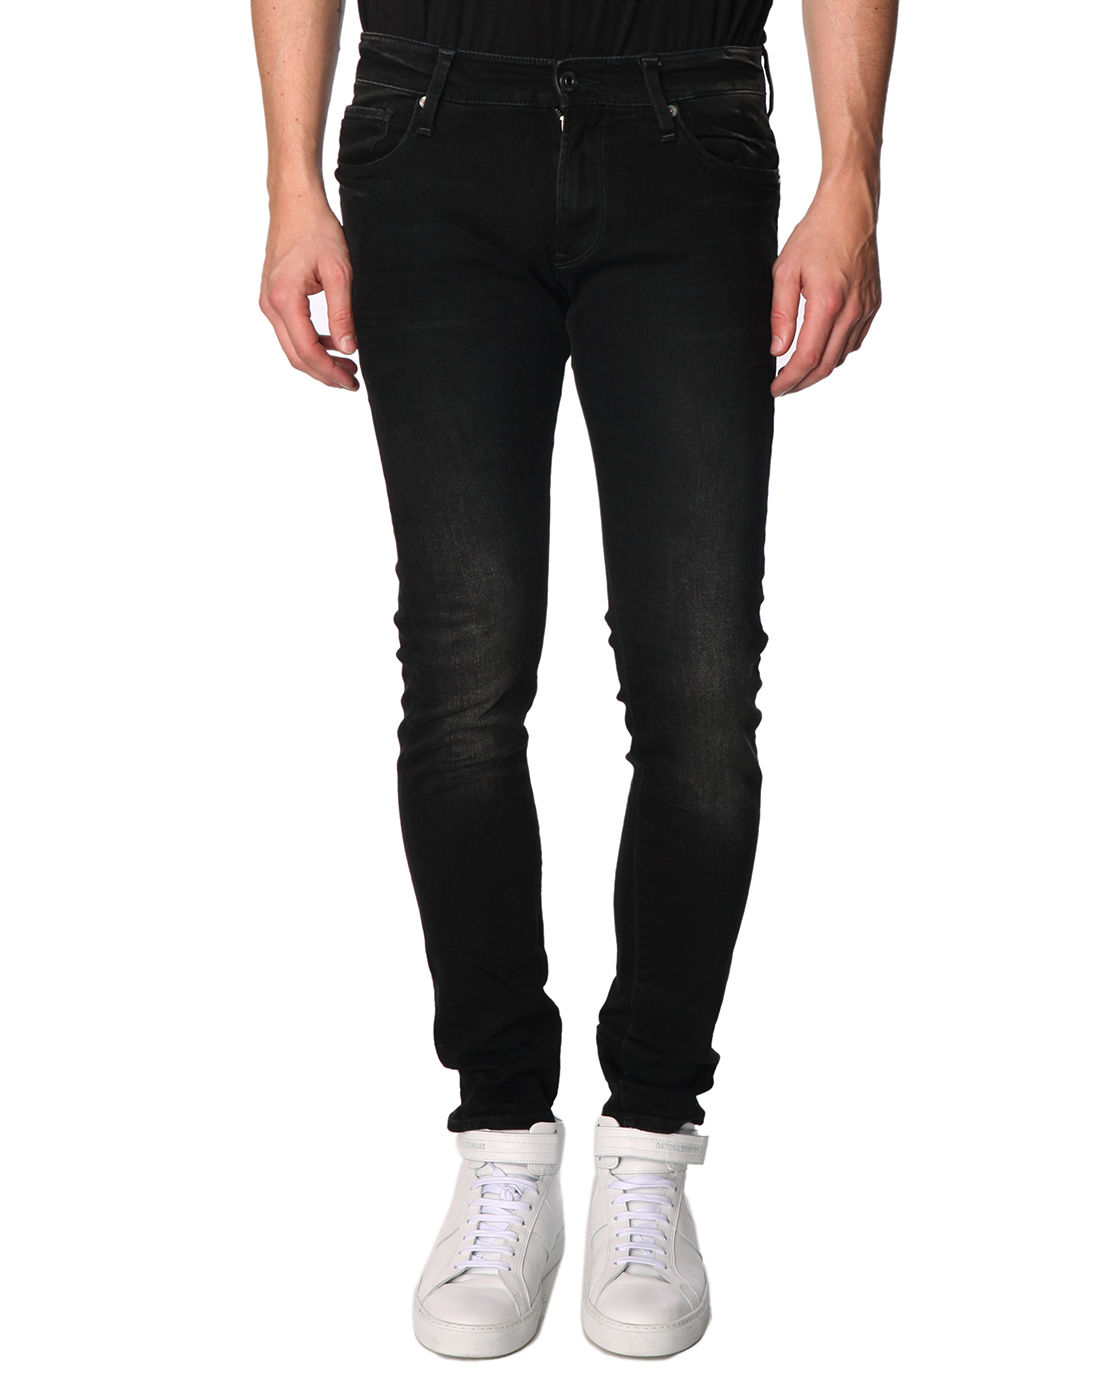 G-star raw Super Slim 3301 Black Washed-out Jeans in Black for Men | Lyst